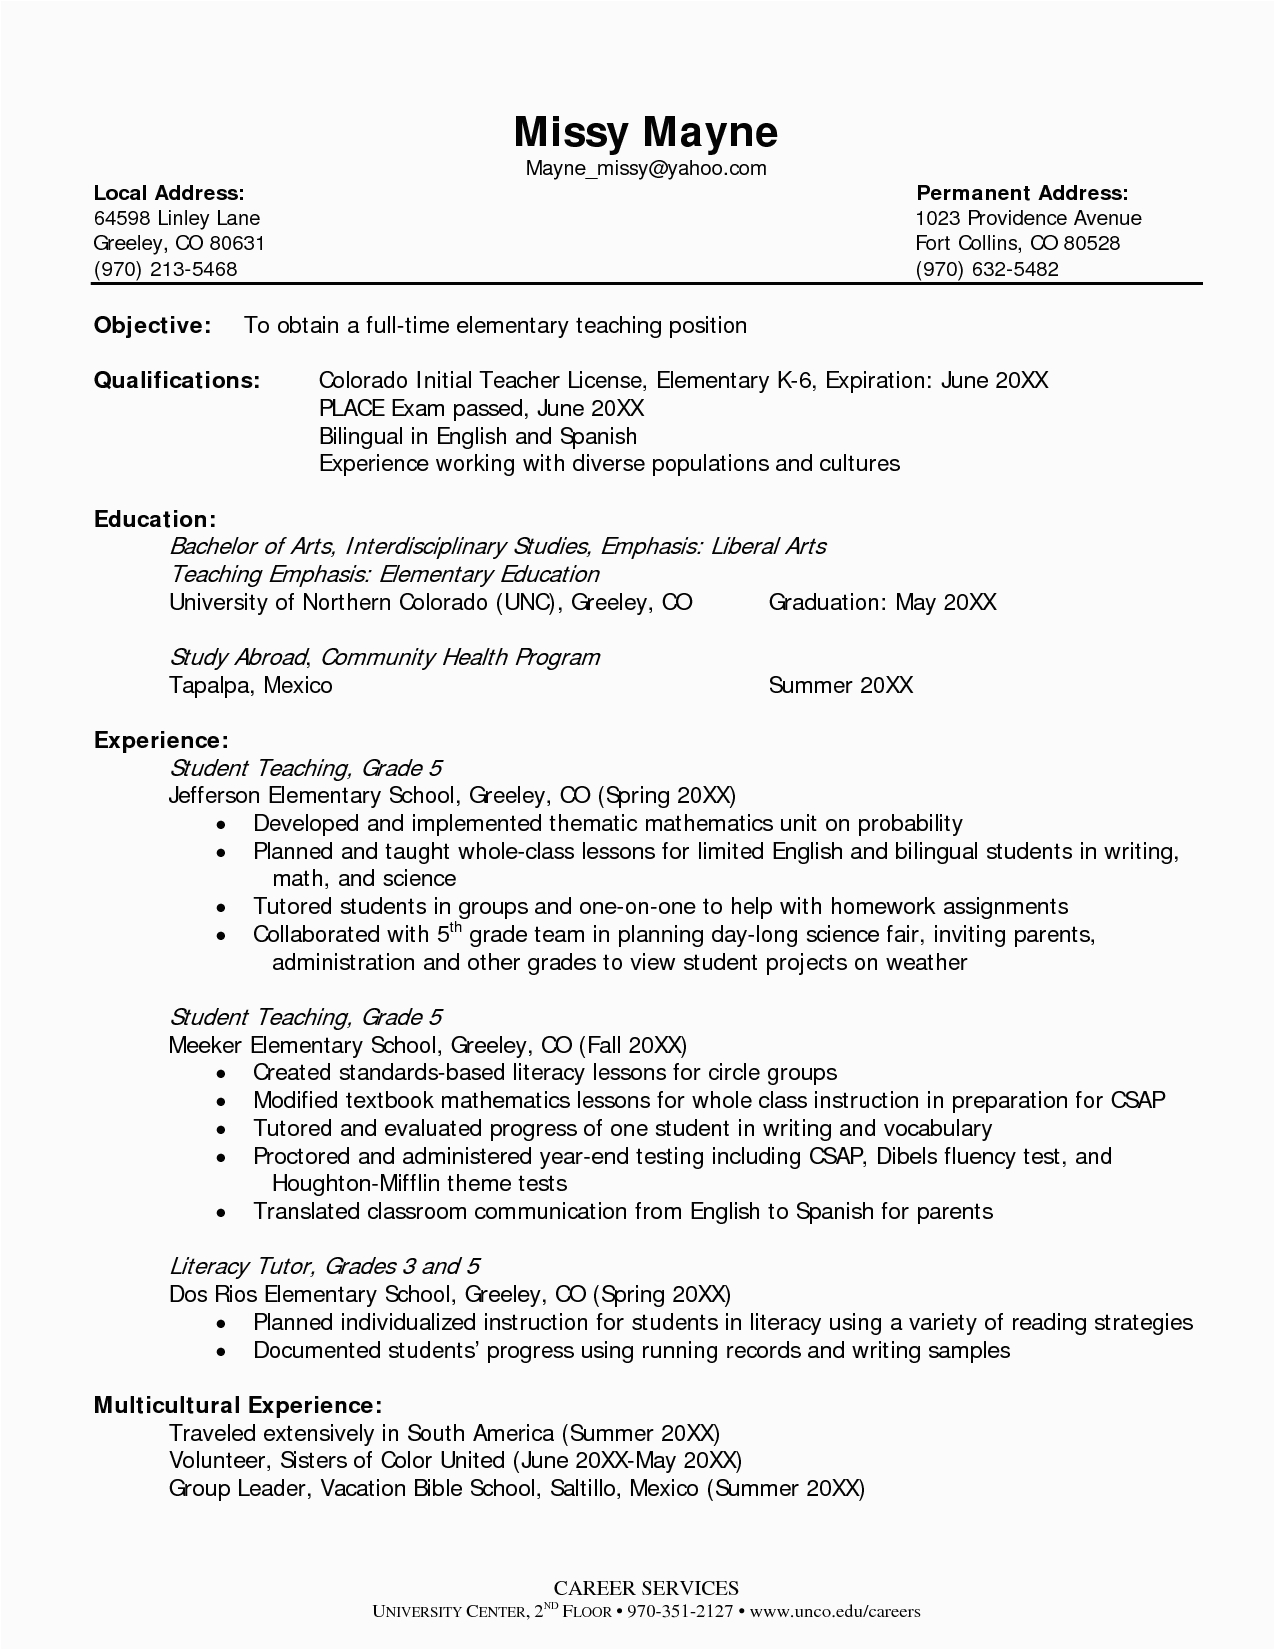 Sample Resume Objective for Teaching Position Pin by Teachers Reasumes On Teachers Resumes